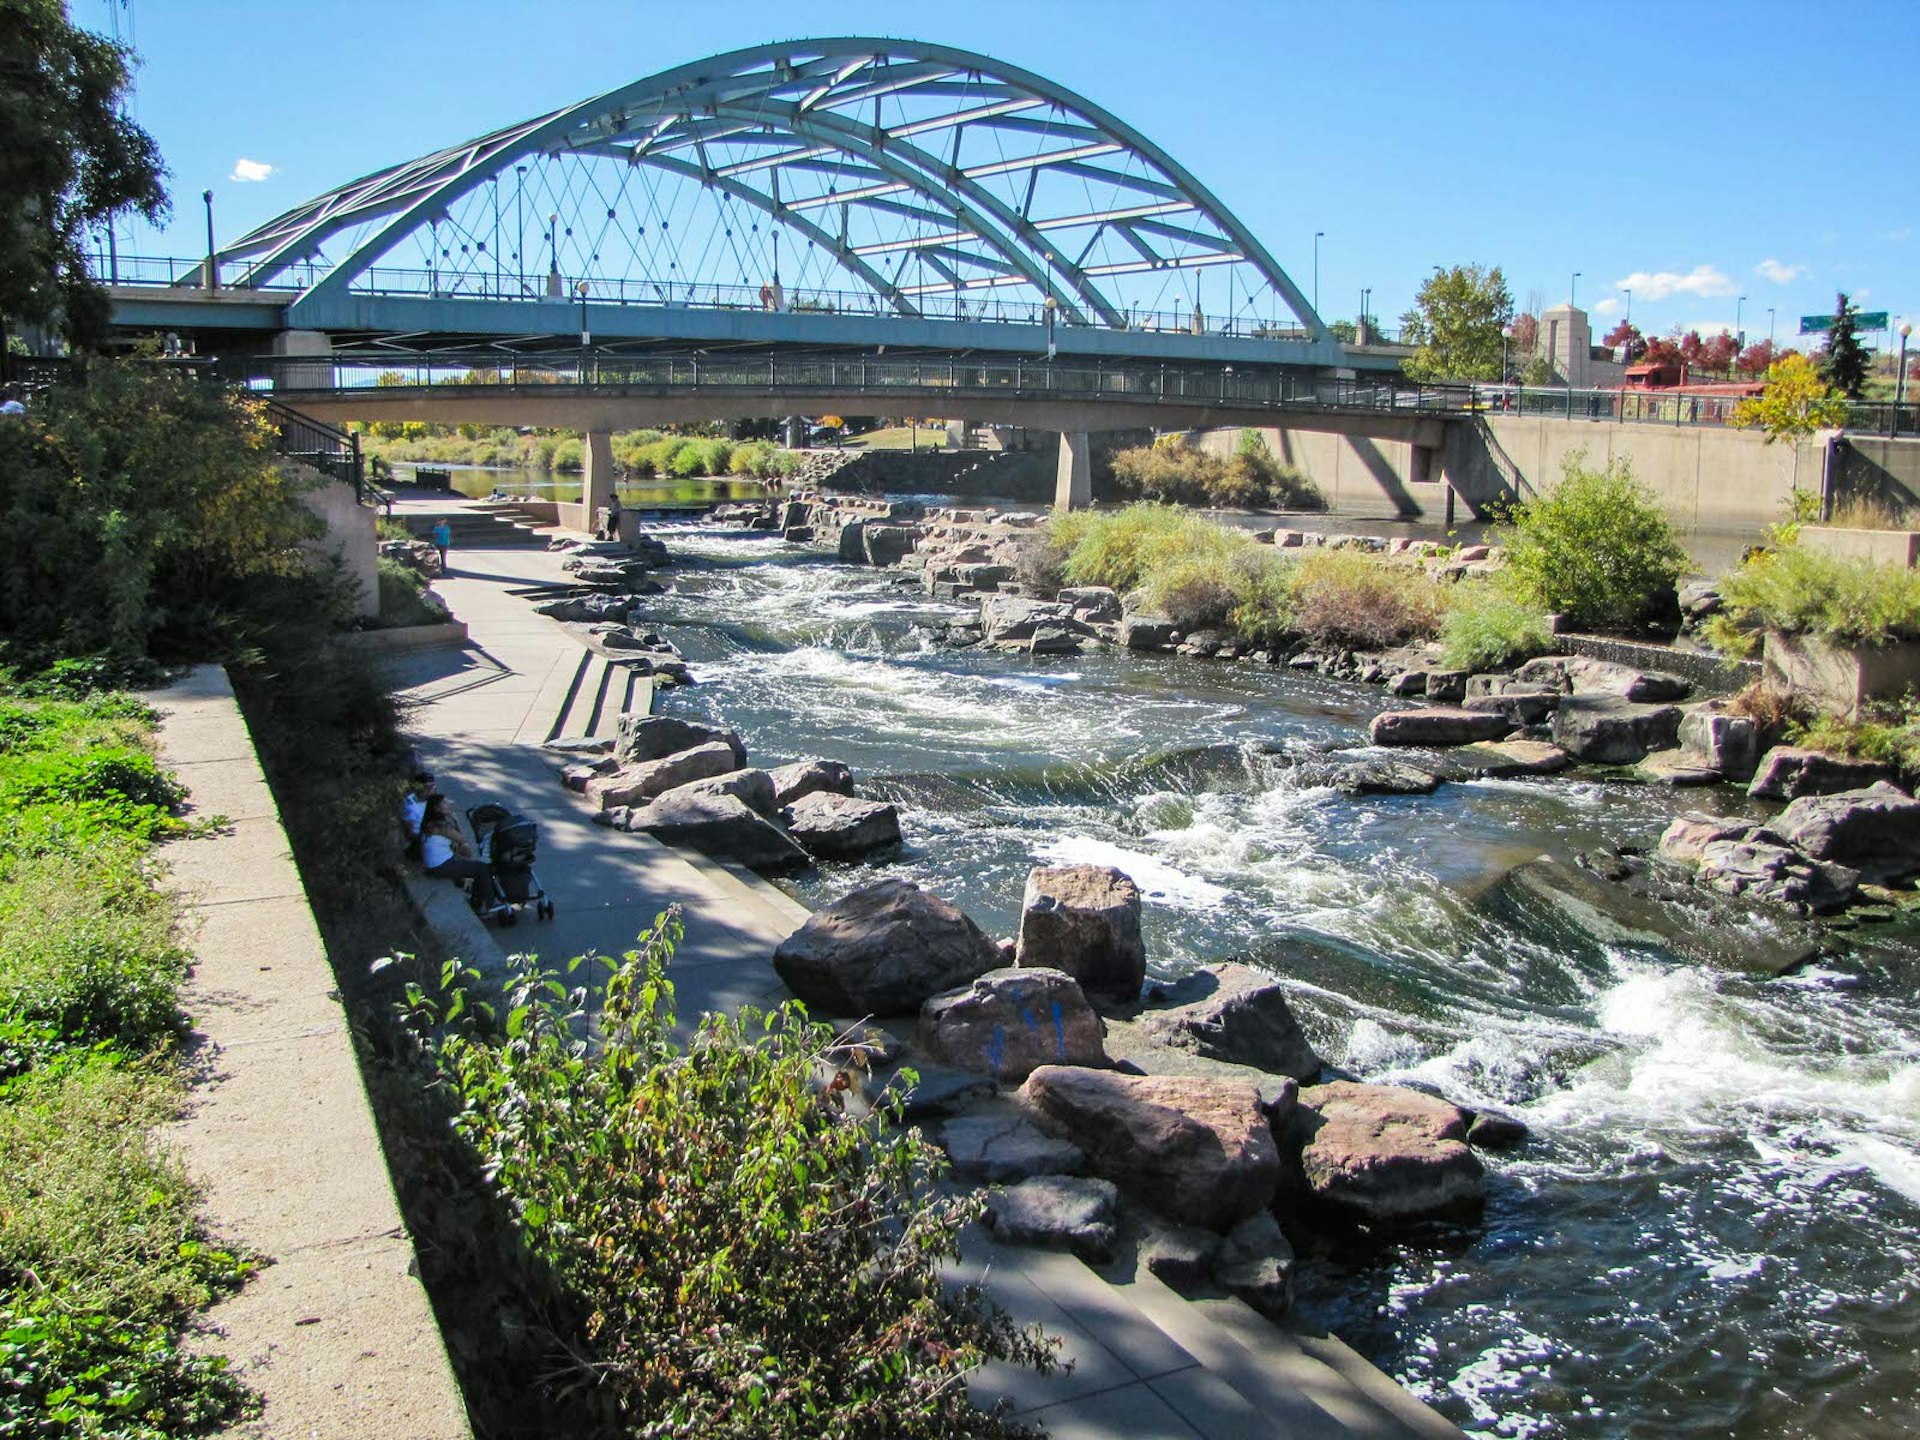 Perfect for strolling, biking or picnicking, Confluence Park embodies Denver's outdoor lifestyle © Liza Prado / Lonely Planet